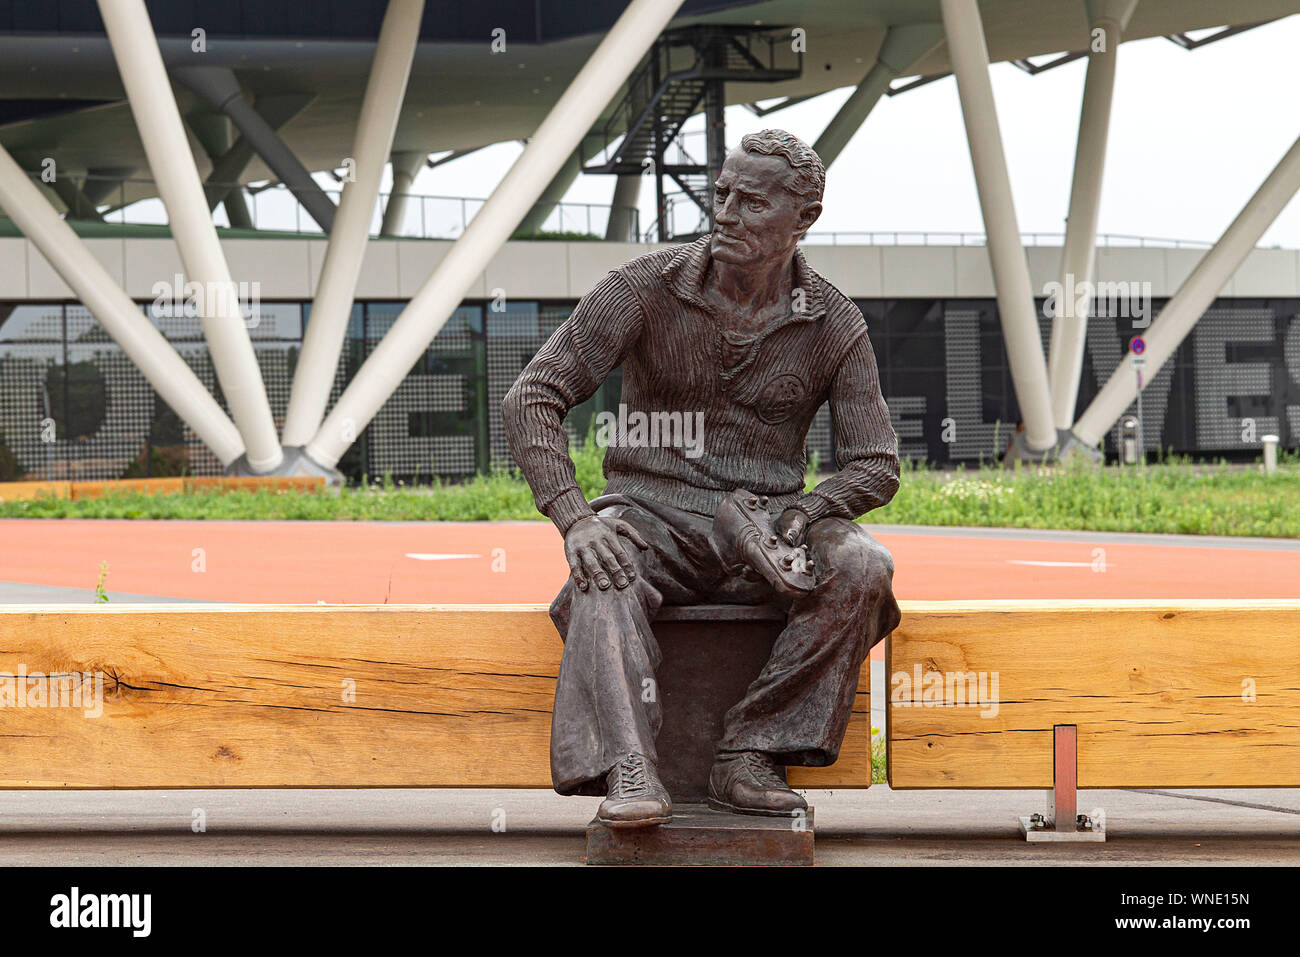 Statue, monument of company founder (company founder) Adi Dassler in front  of the arena; Adidas Arena, the administrative building of the adidas AG,  reminiscent of a football arena, football stadium, has a